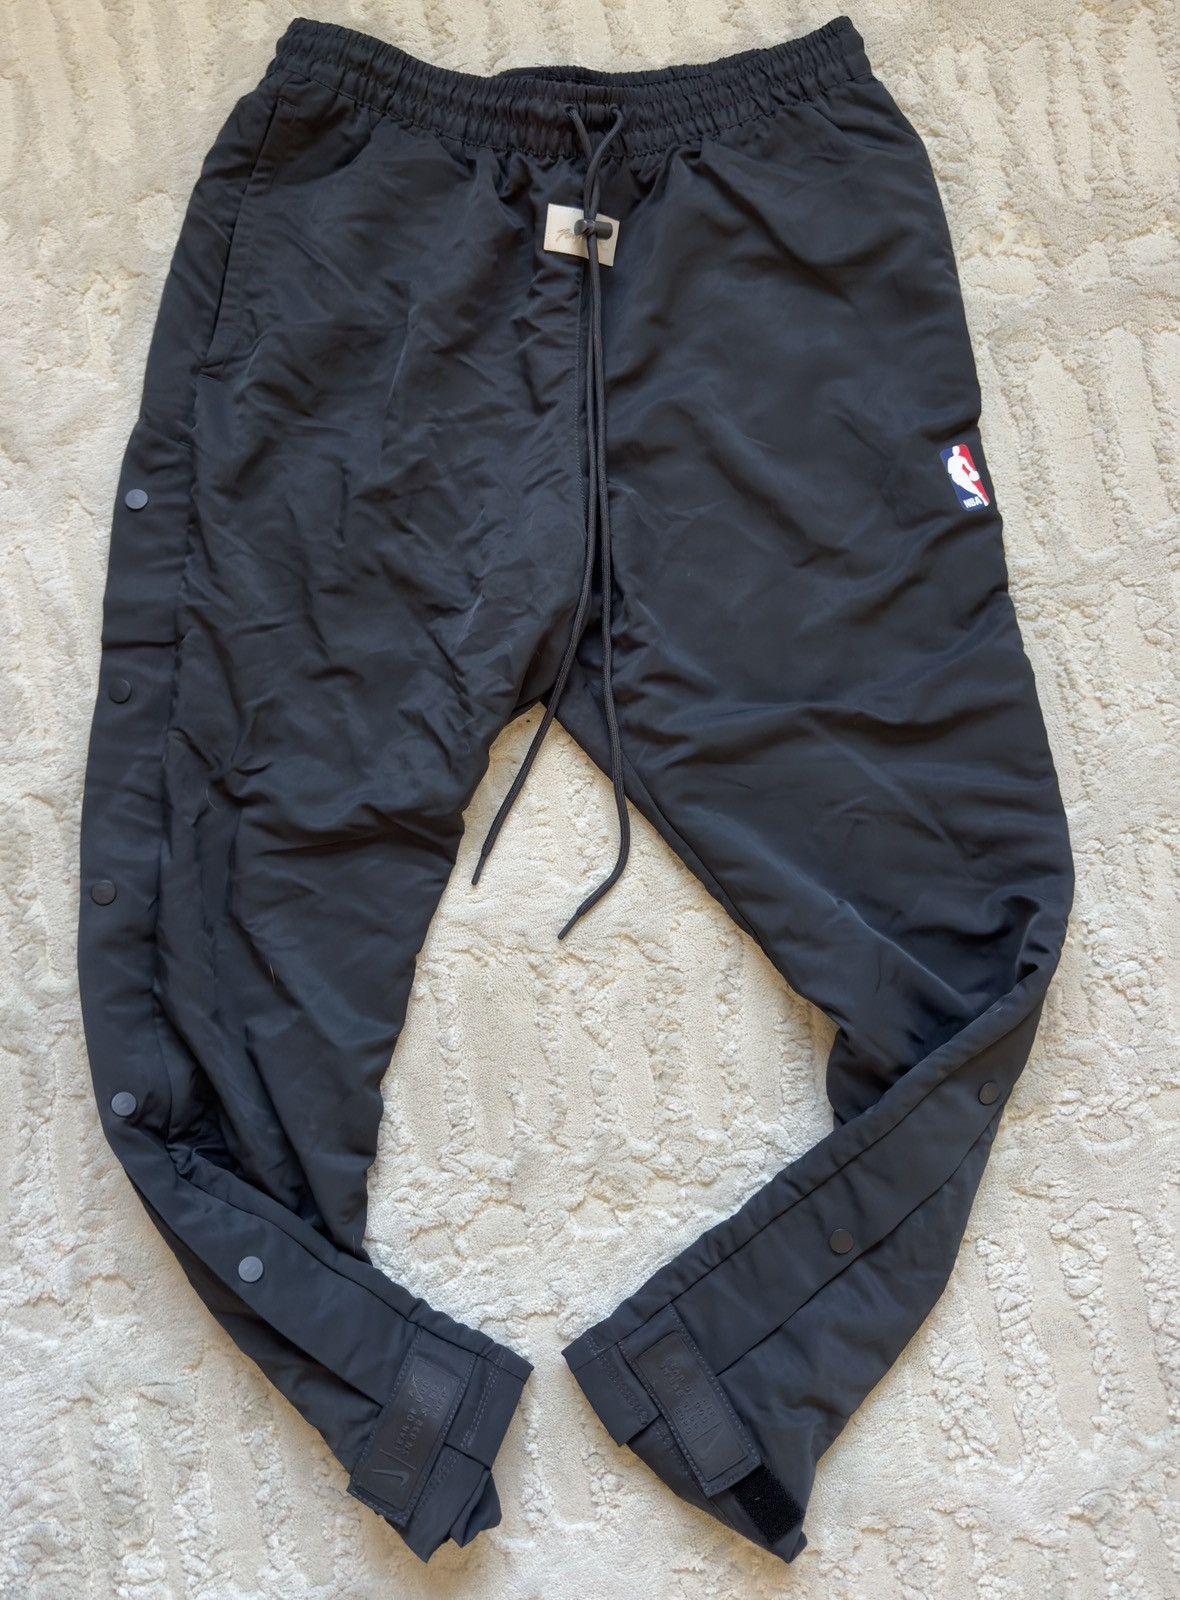 Fear Of God Nike Warm Up Pants | Grailed